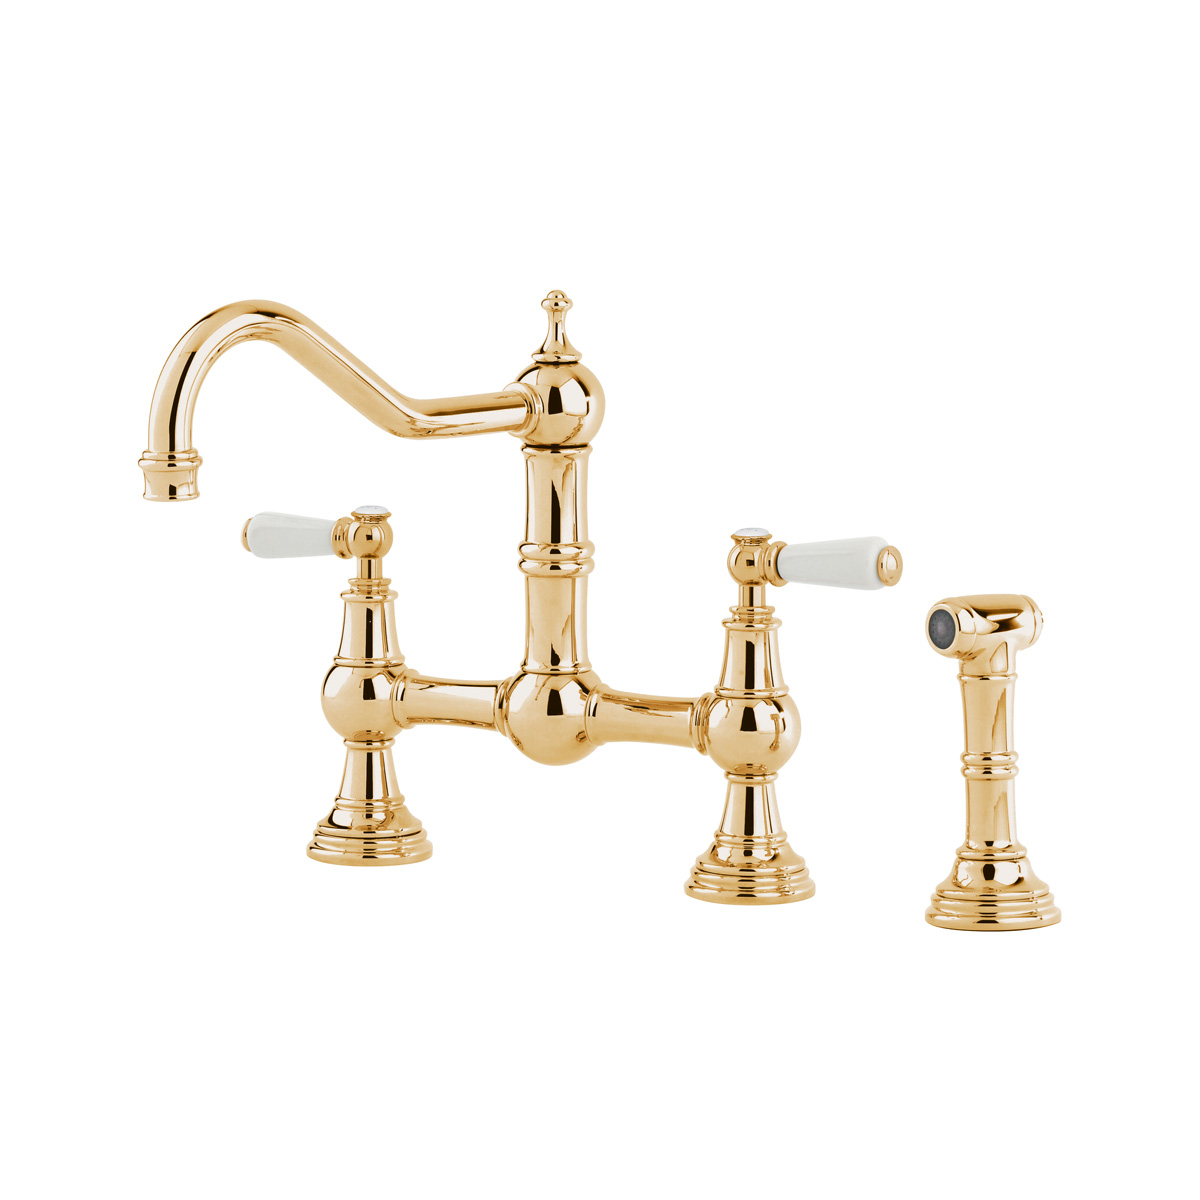 Shaws by Perrin & Rowe Hambleton French bridge mixer with spray rinse in Polished Brass. Provence style kitchen tap AUSH.4756. Distributed in Australia by Luxe by Design, Brisbane.